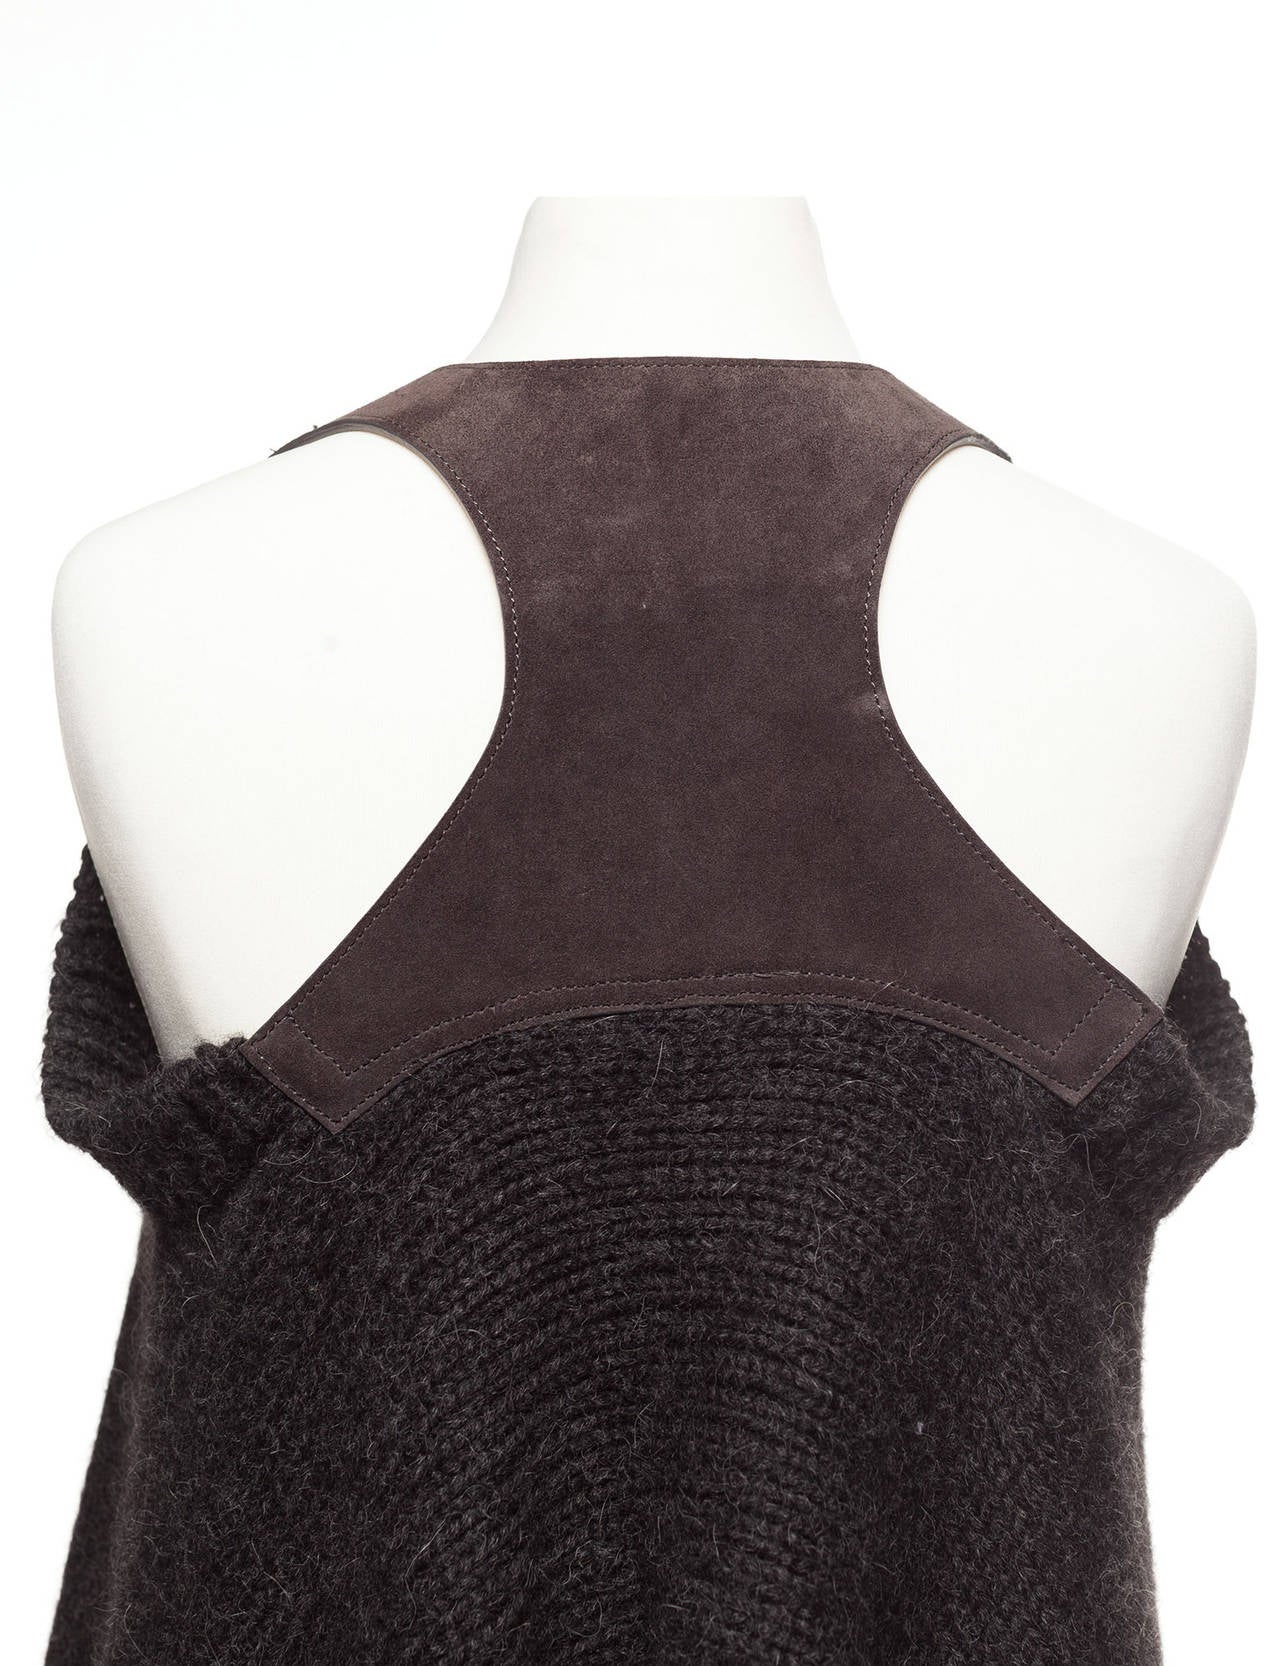 Kaufmanfranco alpaca knitted vest with leather back detail, Sz. S 1